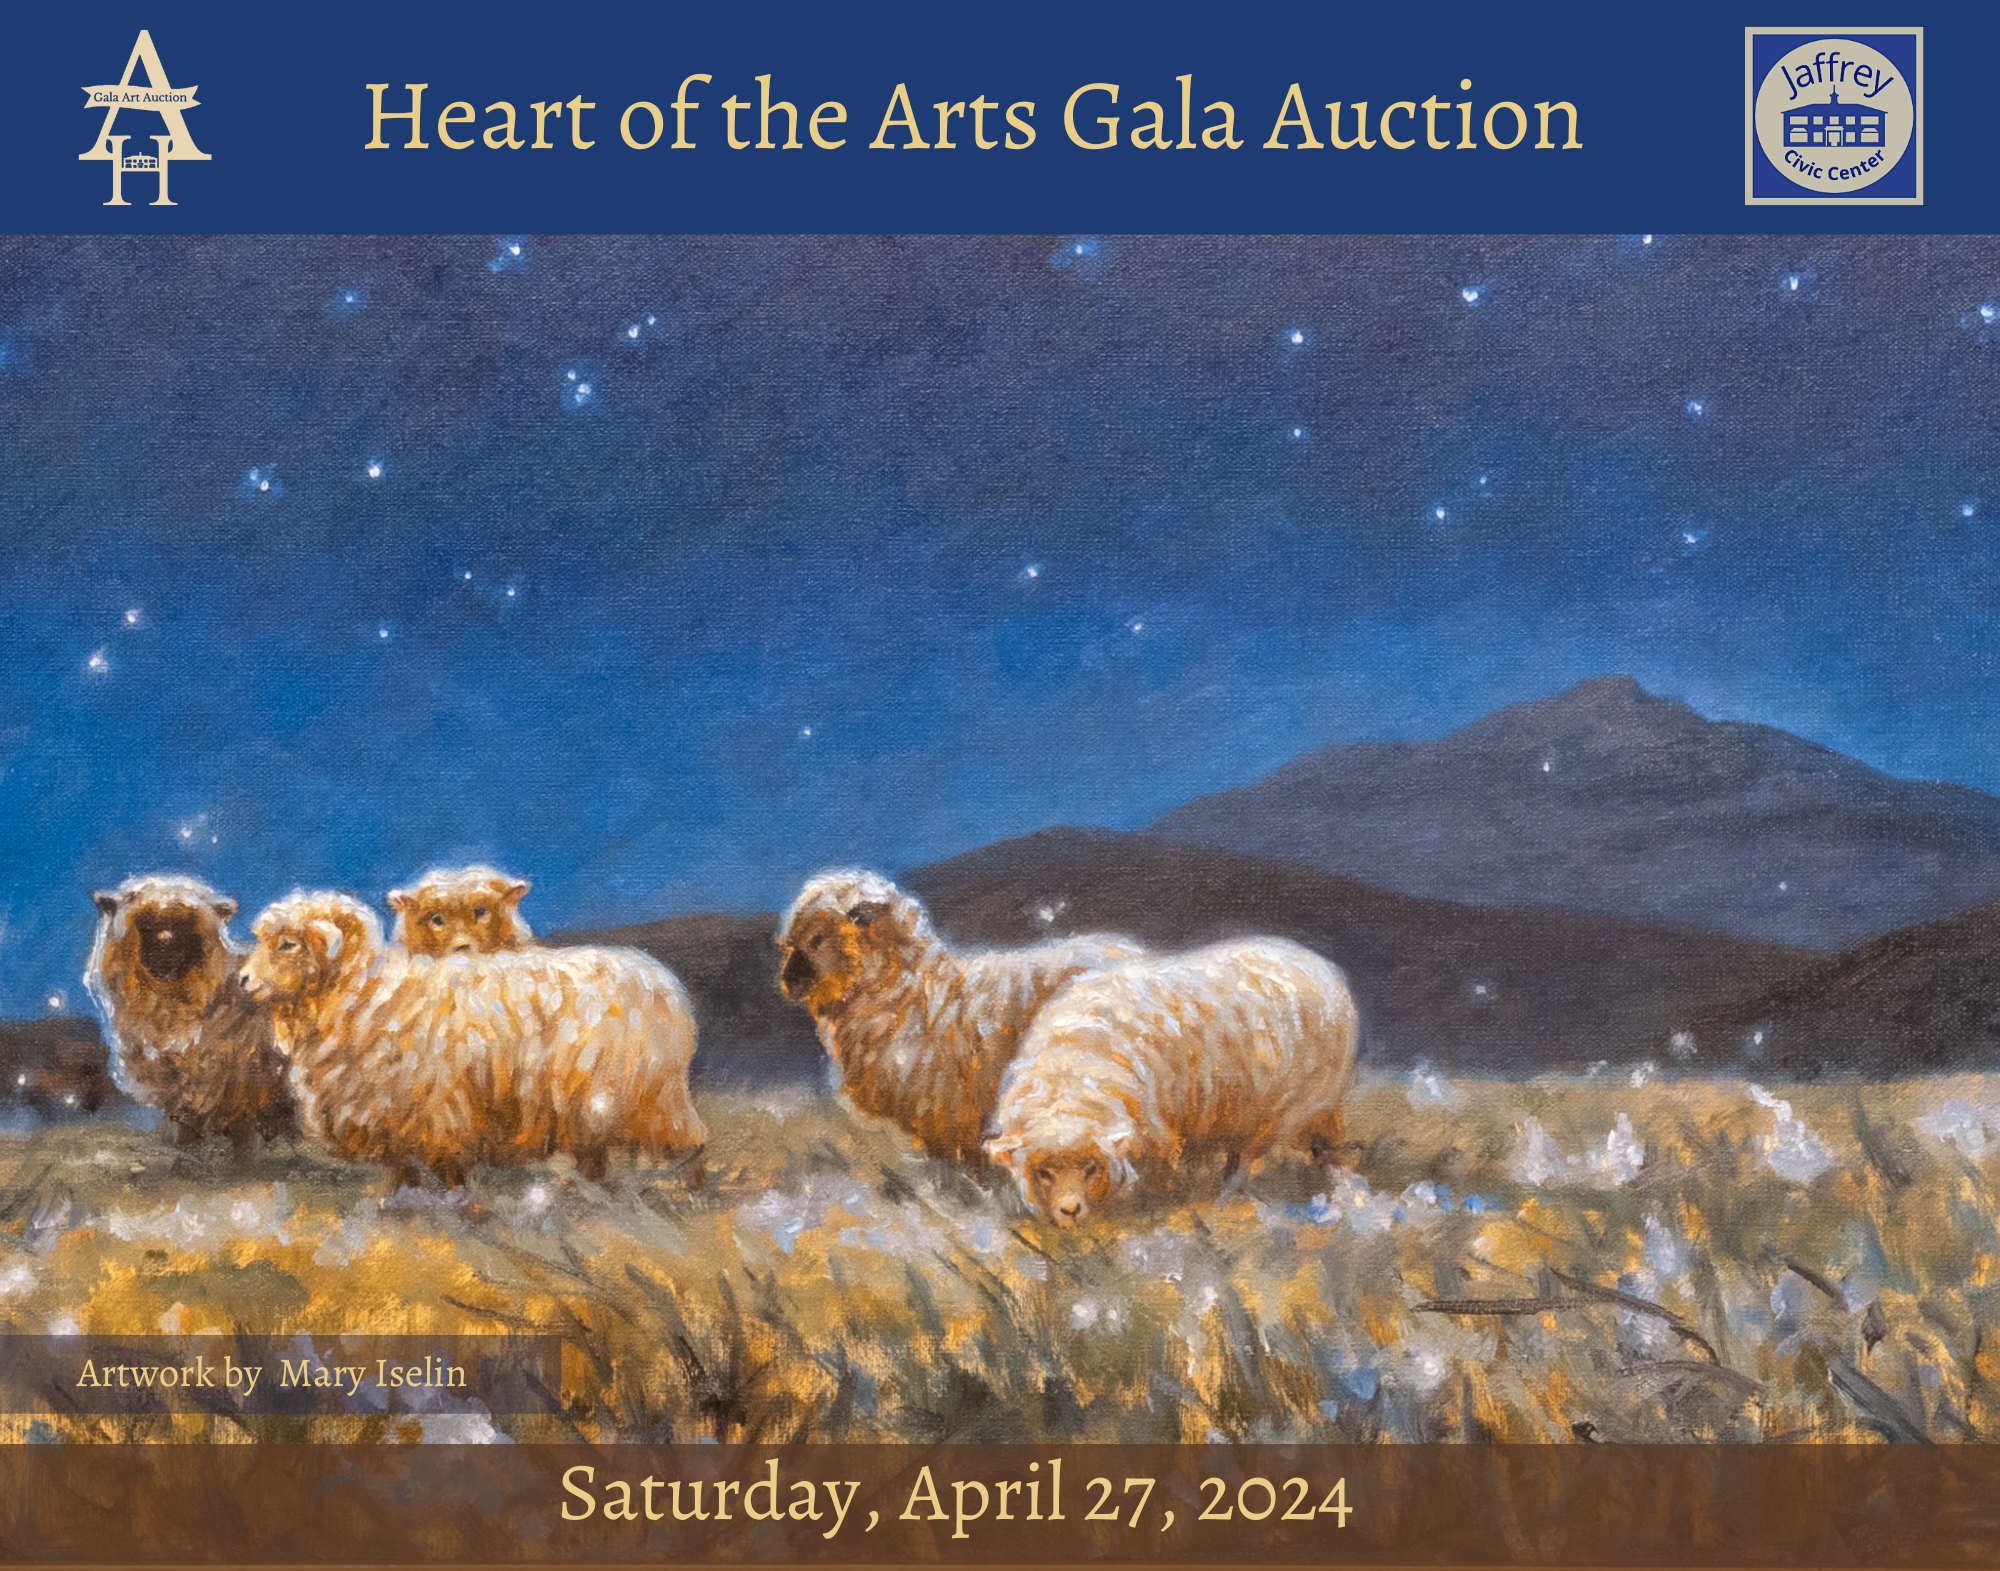 The Heart of the Arts Gala Live Auction